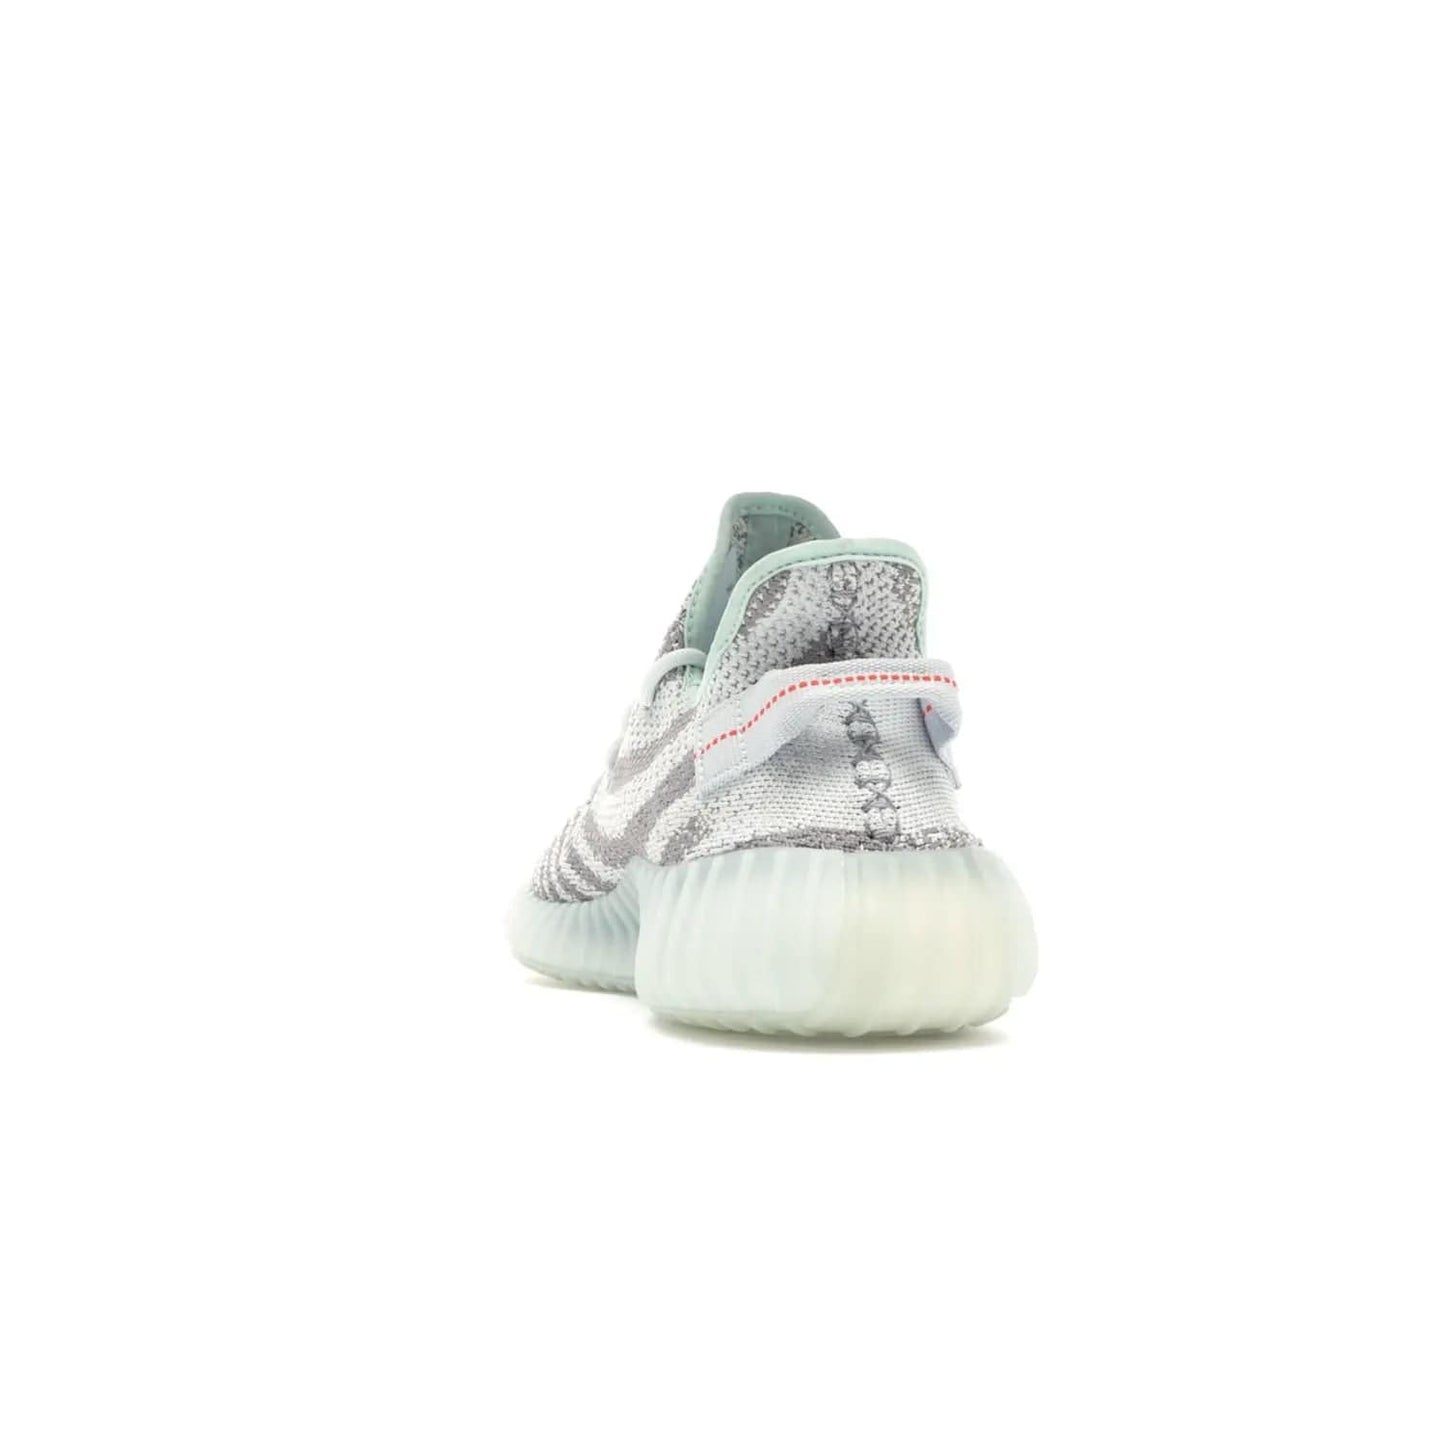 adidas Yeezy Boost 350 V2 Blue Tint - Image 27 - Only at www.BallersClubKickz.com - The adidas Yeezy Boost 350 V2 Blue Tint merges fashion and functionality with its Primeknit upper and Boost sole. Released in December 2017, this luxurious sneaker is perfect for making a stylish statement.